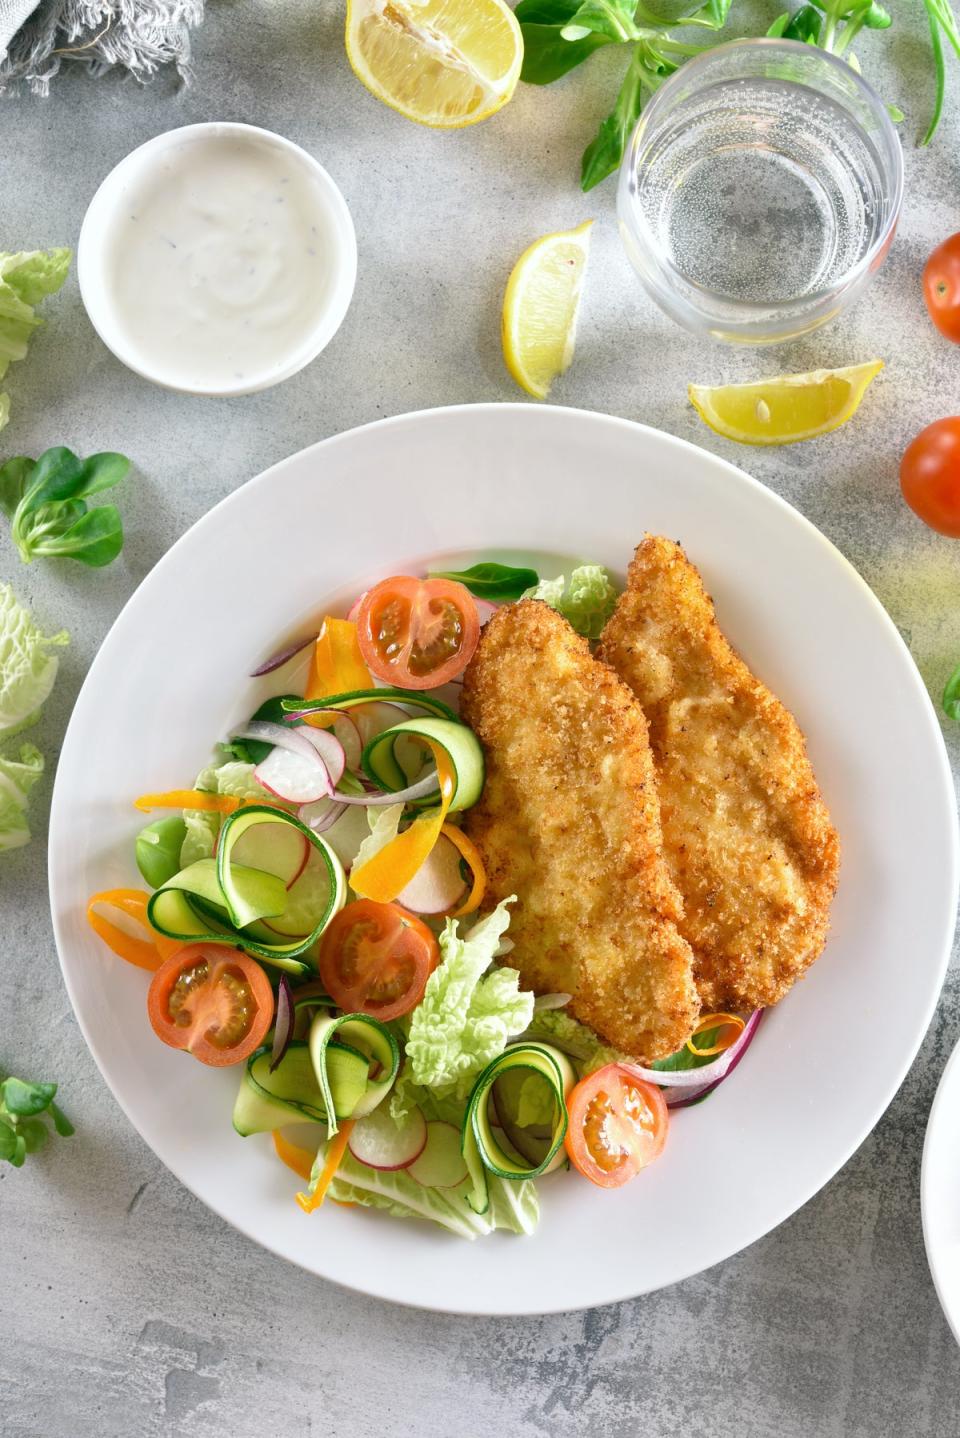 Baked breaded pork cutlets make for an easy weeknight meal (Getty/iStock)